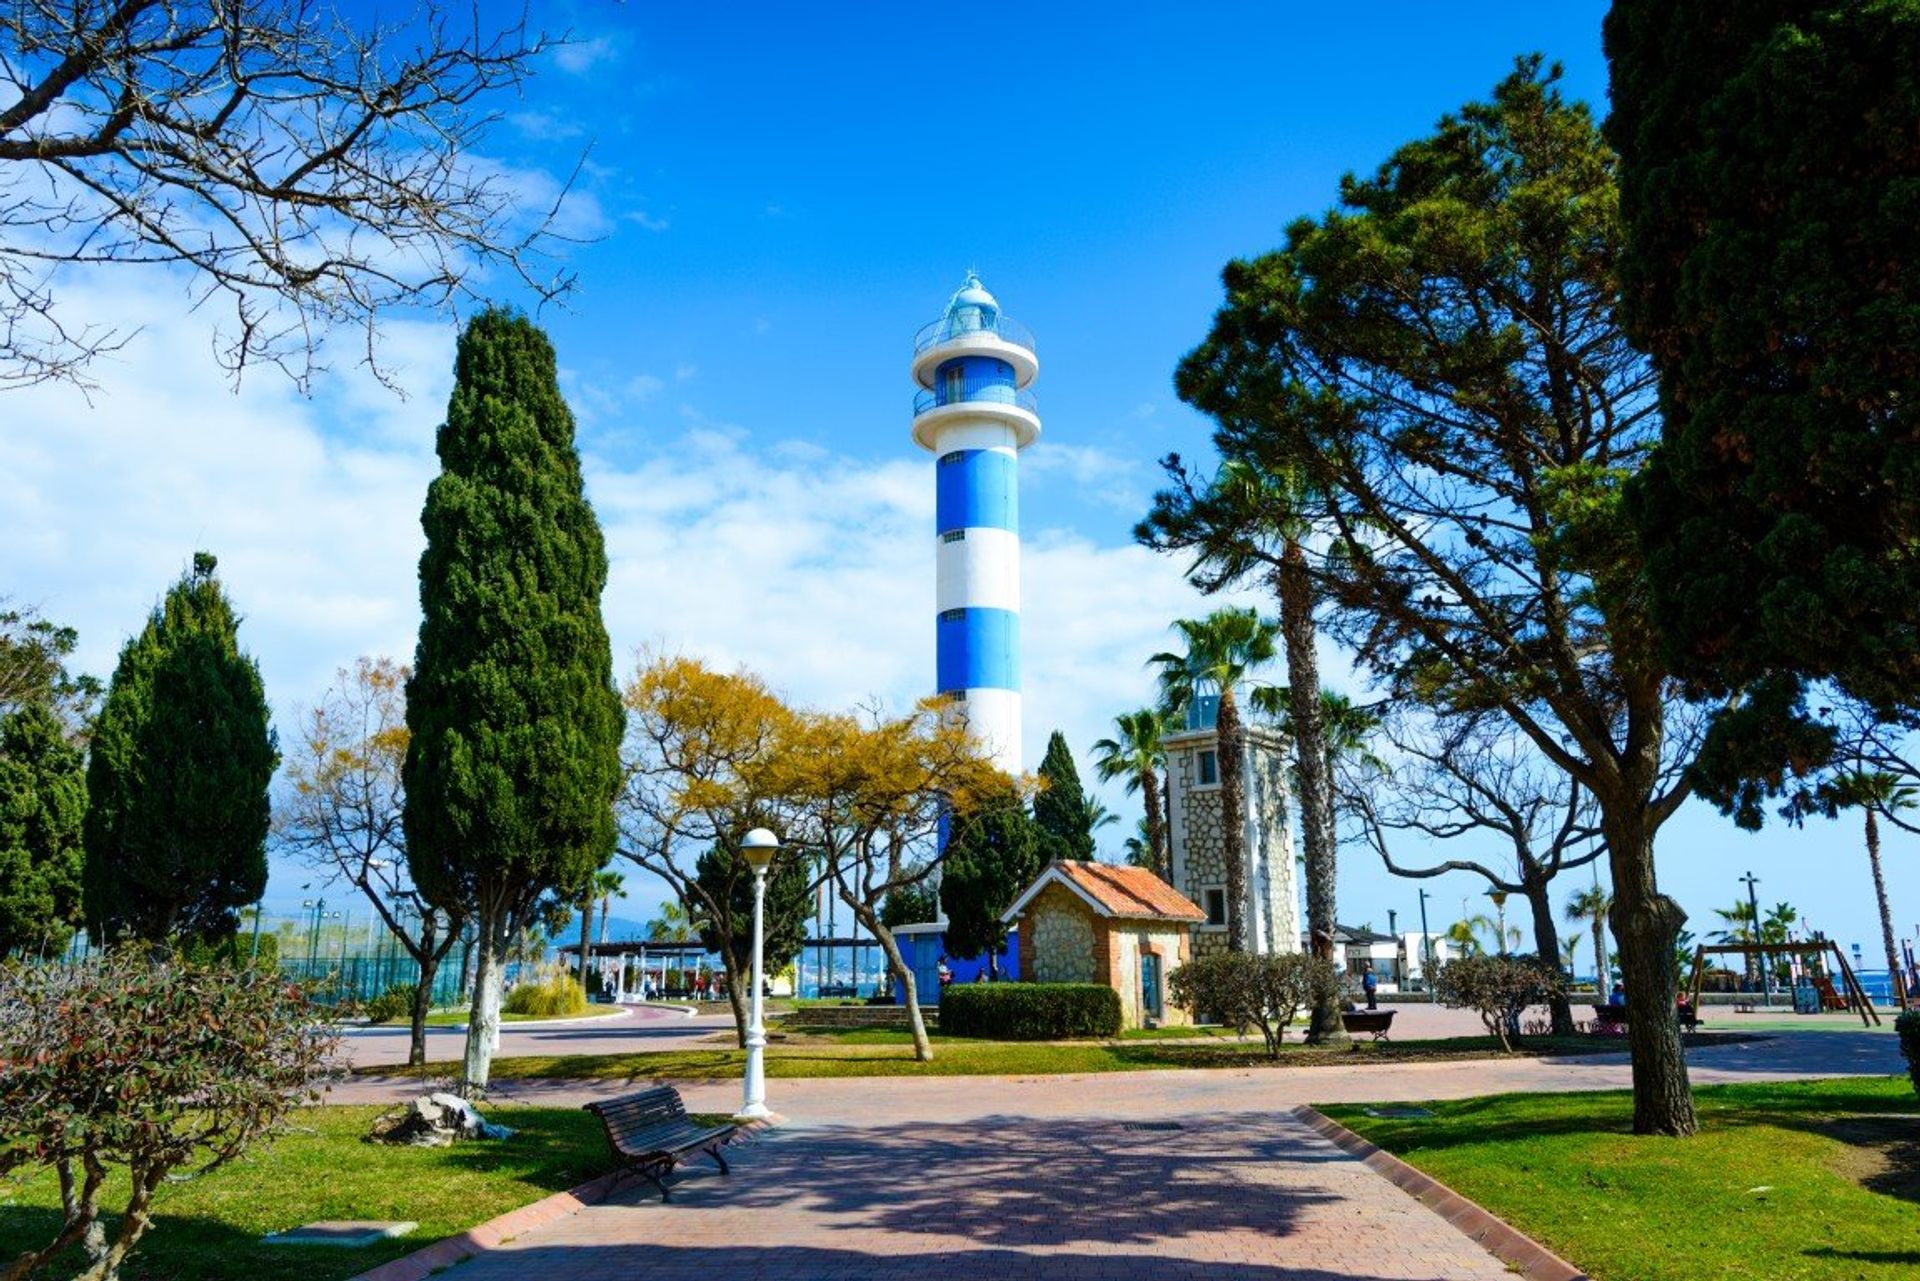 Torre del Mar's iconic 18th century lighthouse overlooking the seafront promenade and Meditterranean